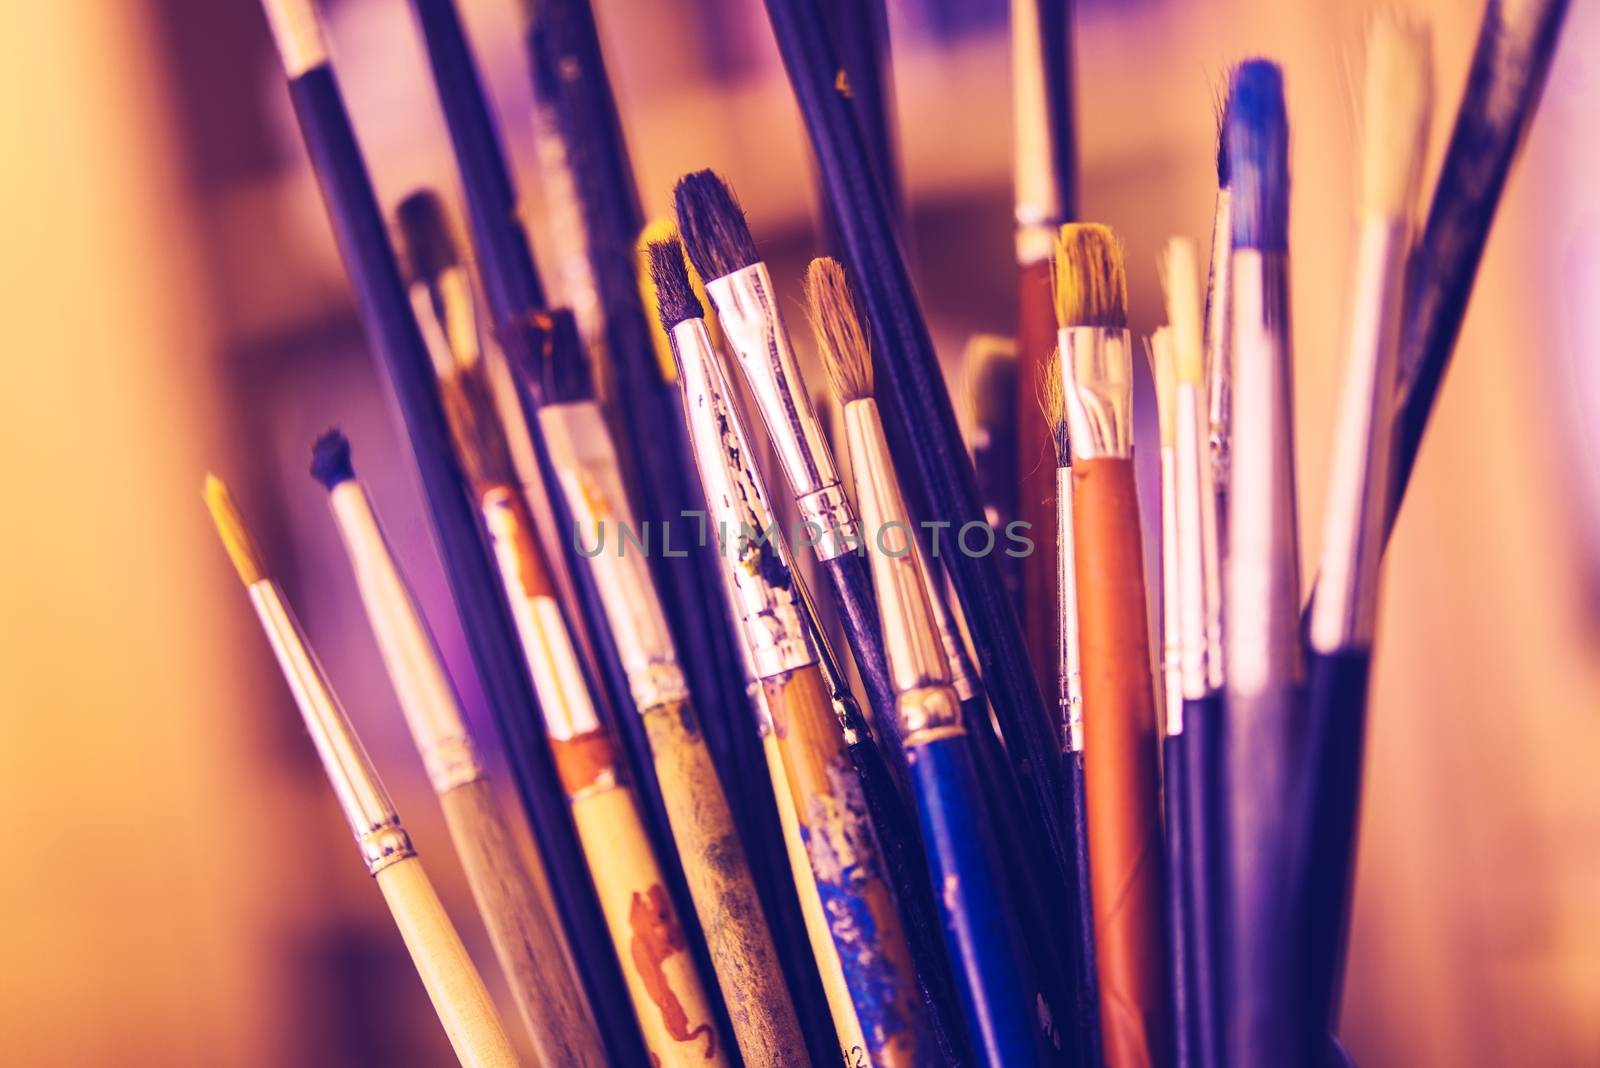 Dirty Colorful Oil Paintbrushes Closeup Photo. Oil Painting Concept.